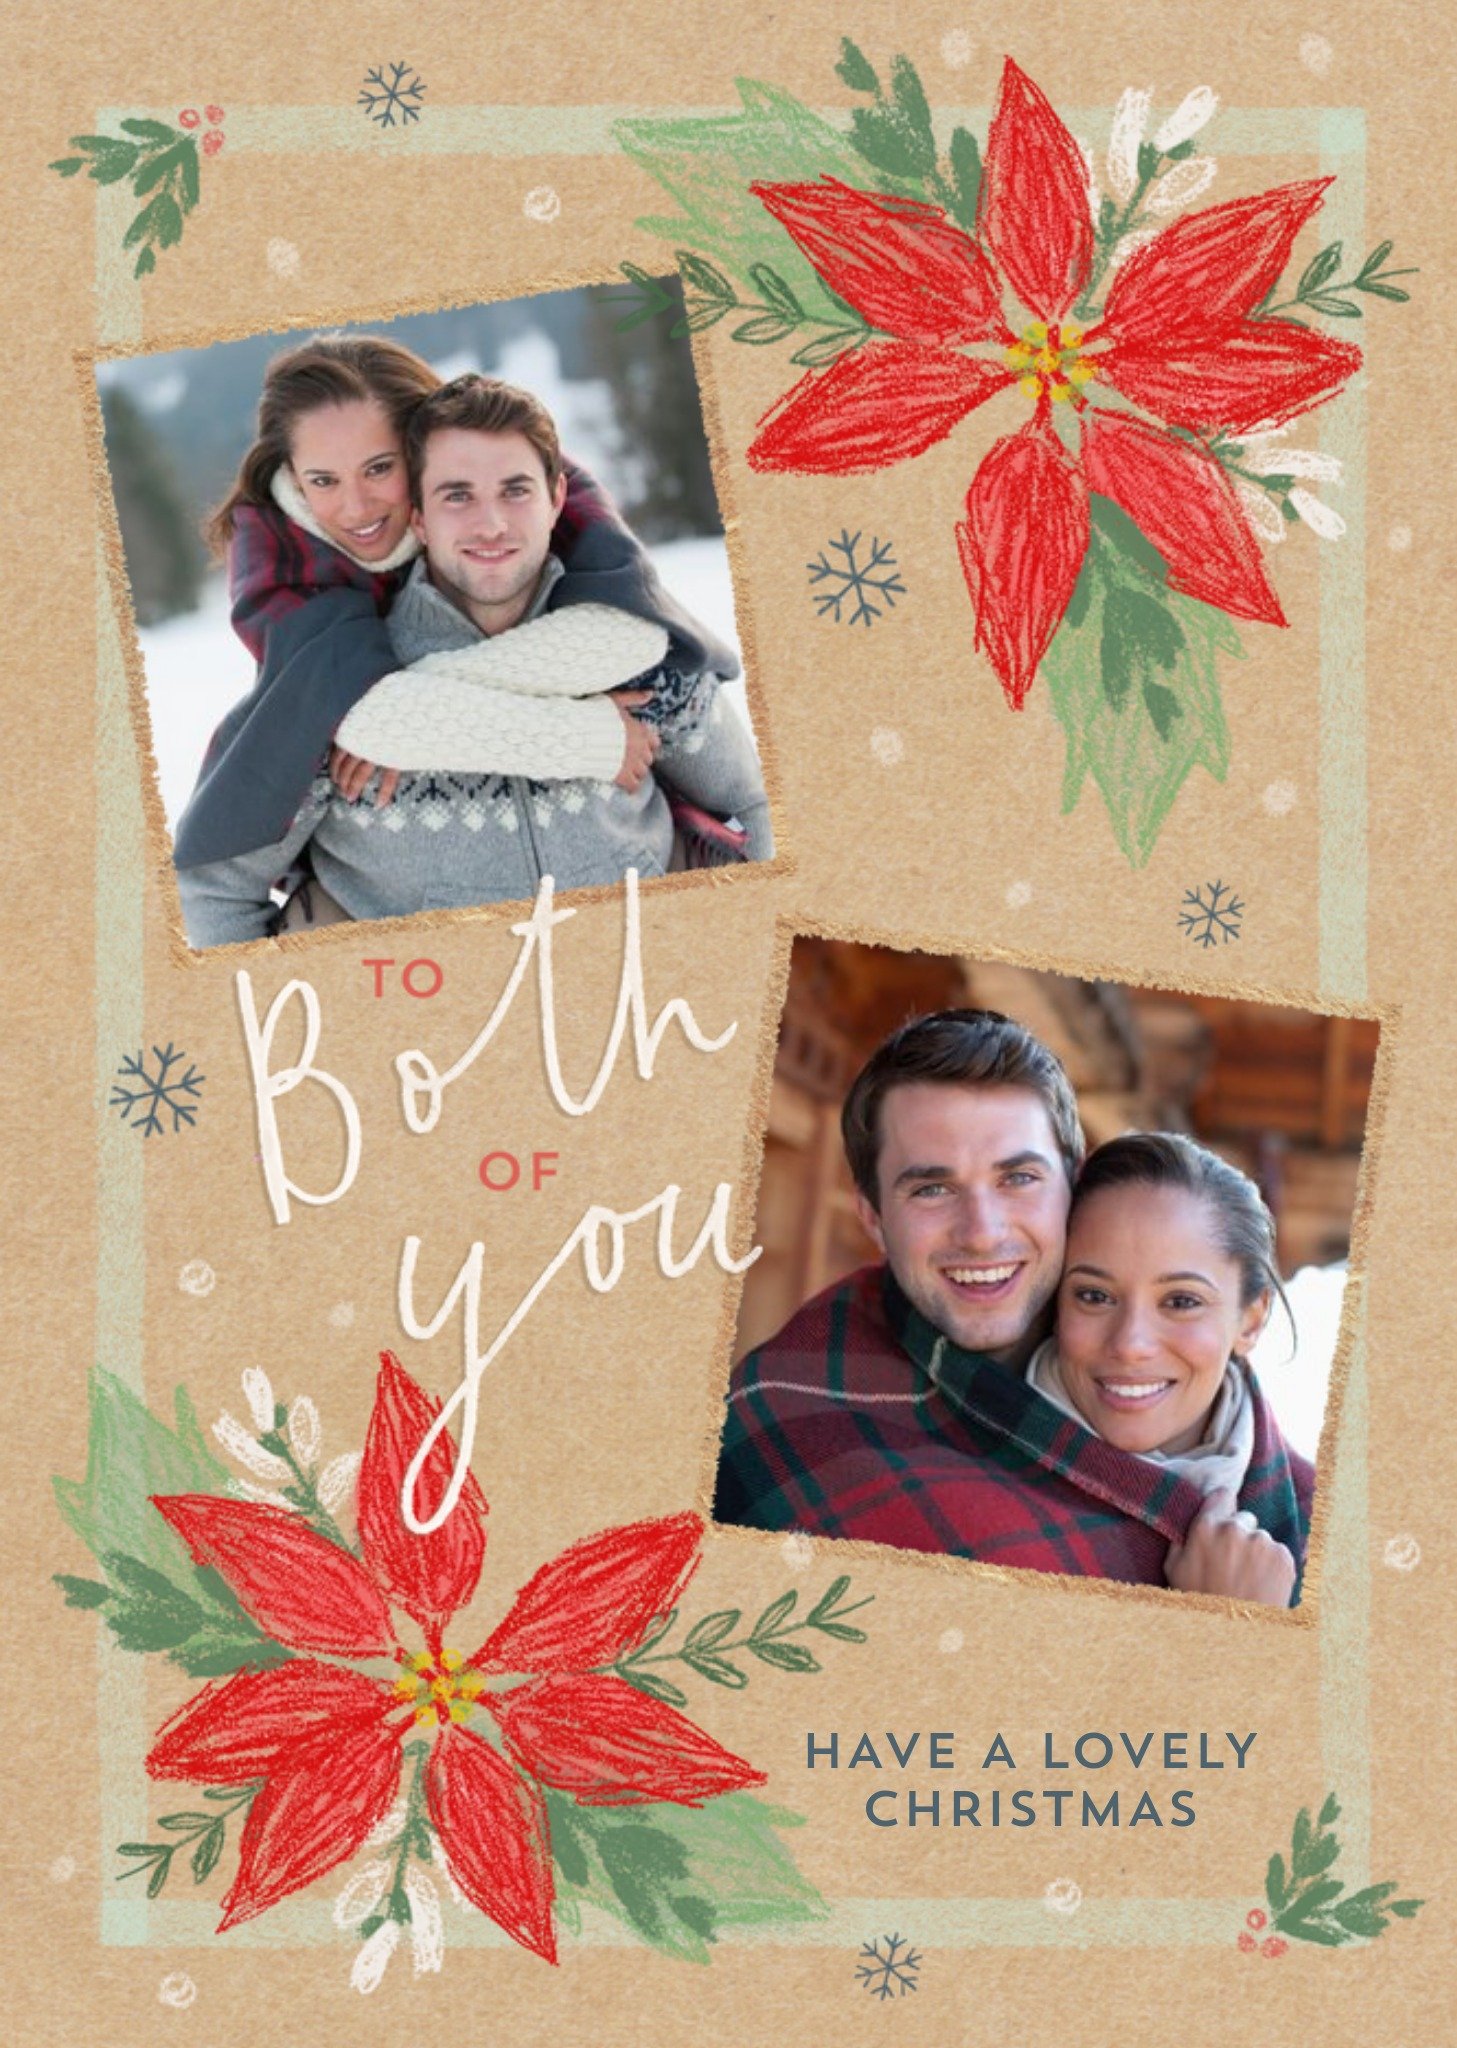 Moonpig Christmas Card - Have A Lovely Christmas - To Both Of You - Poinsettia - Photo Upload, Large